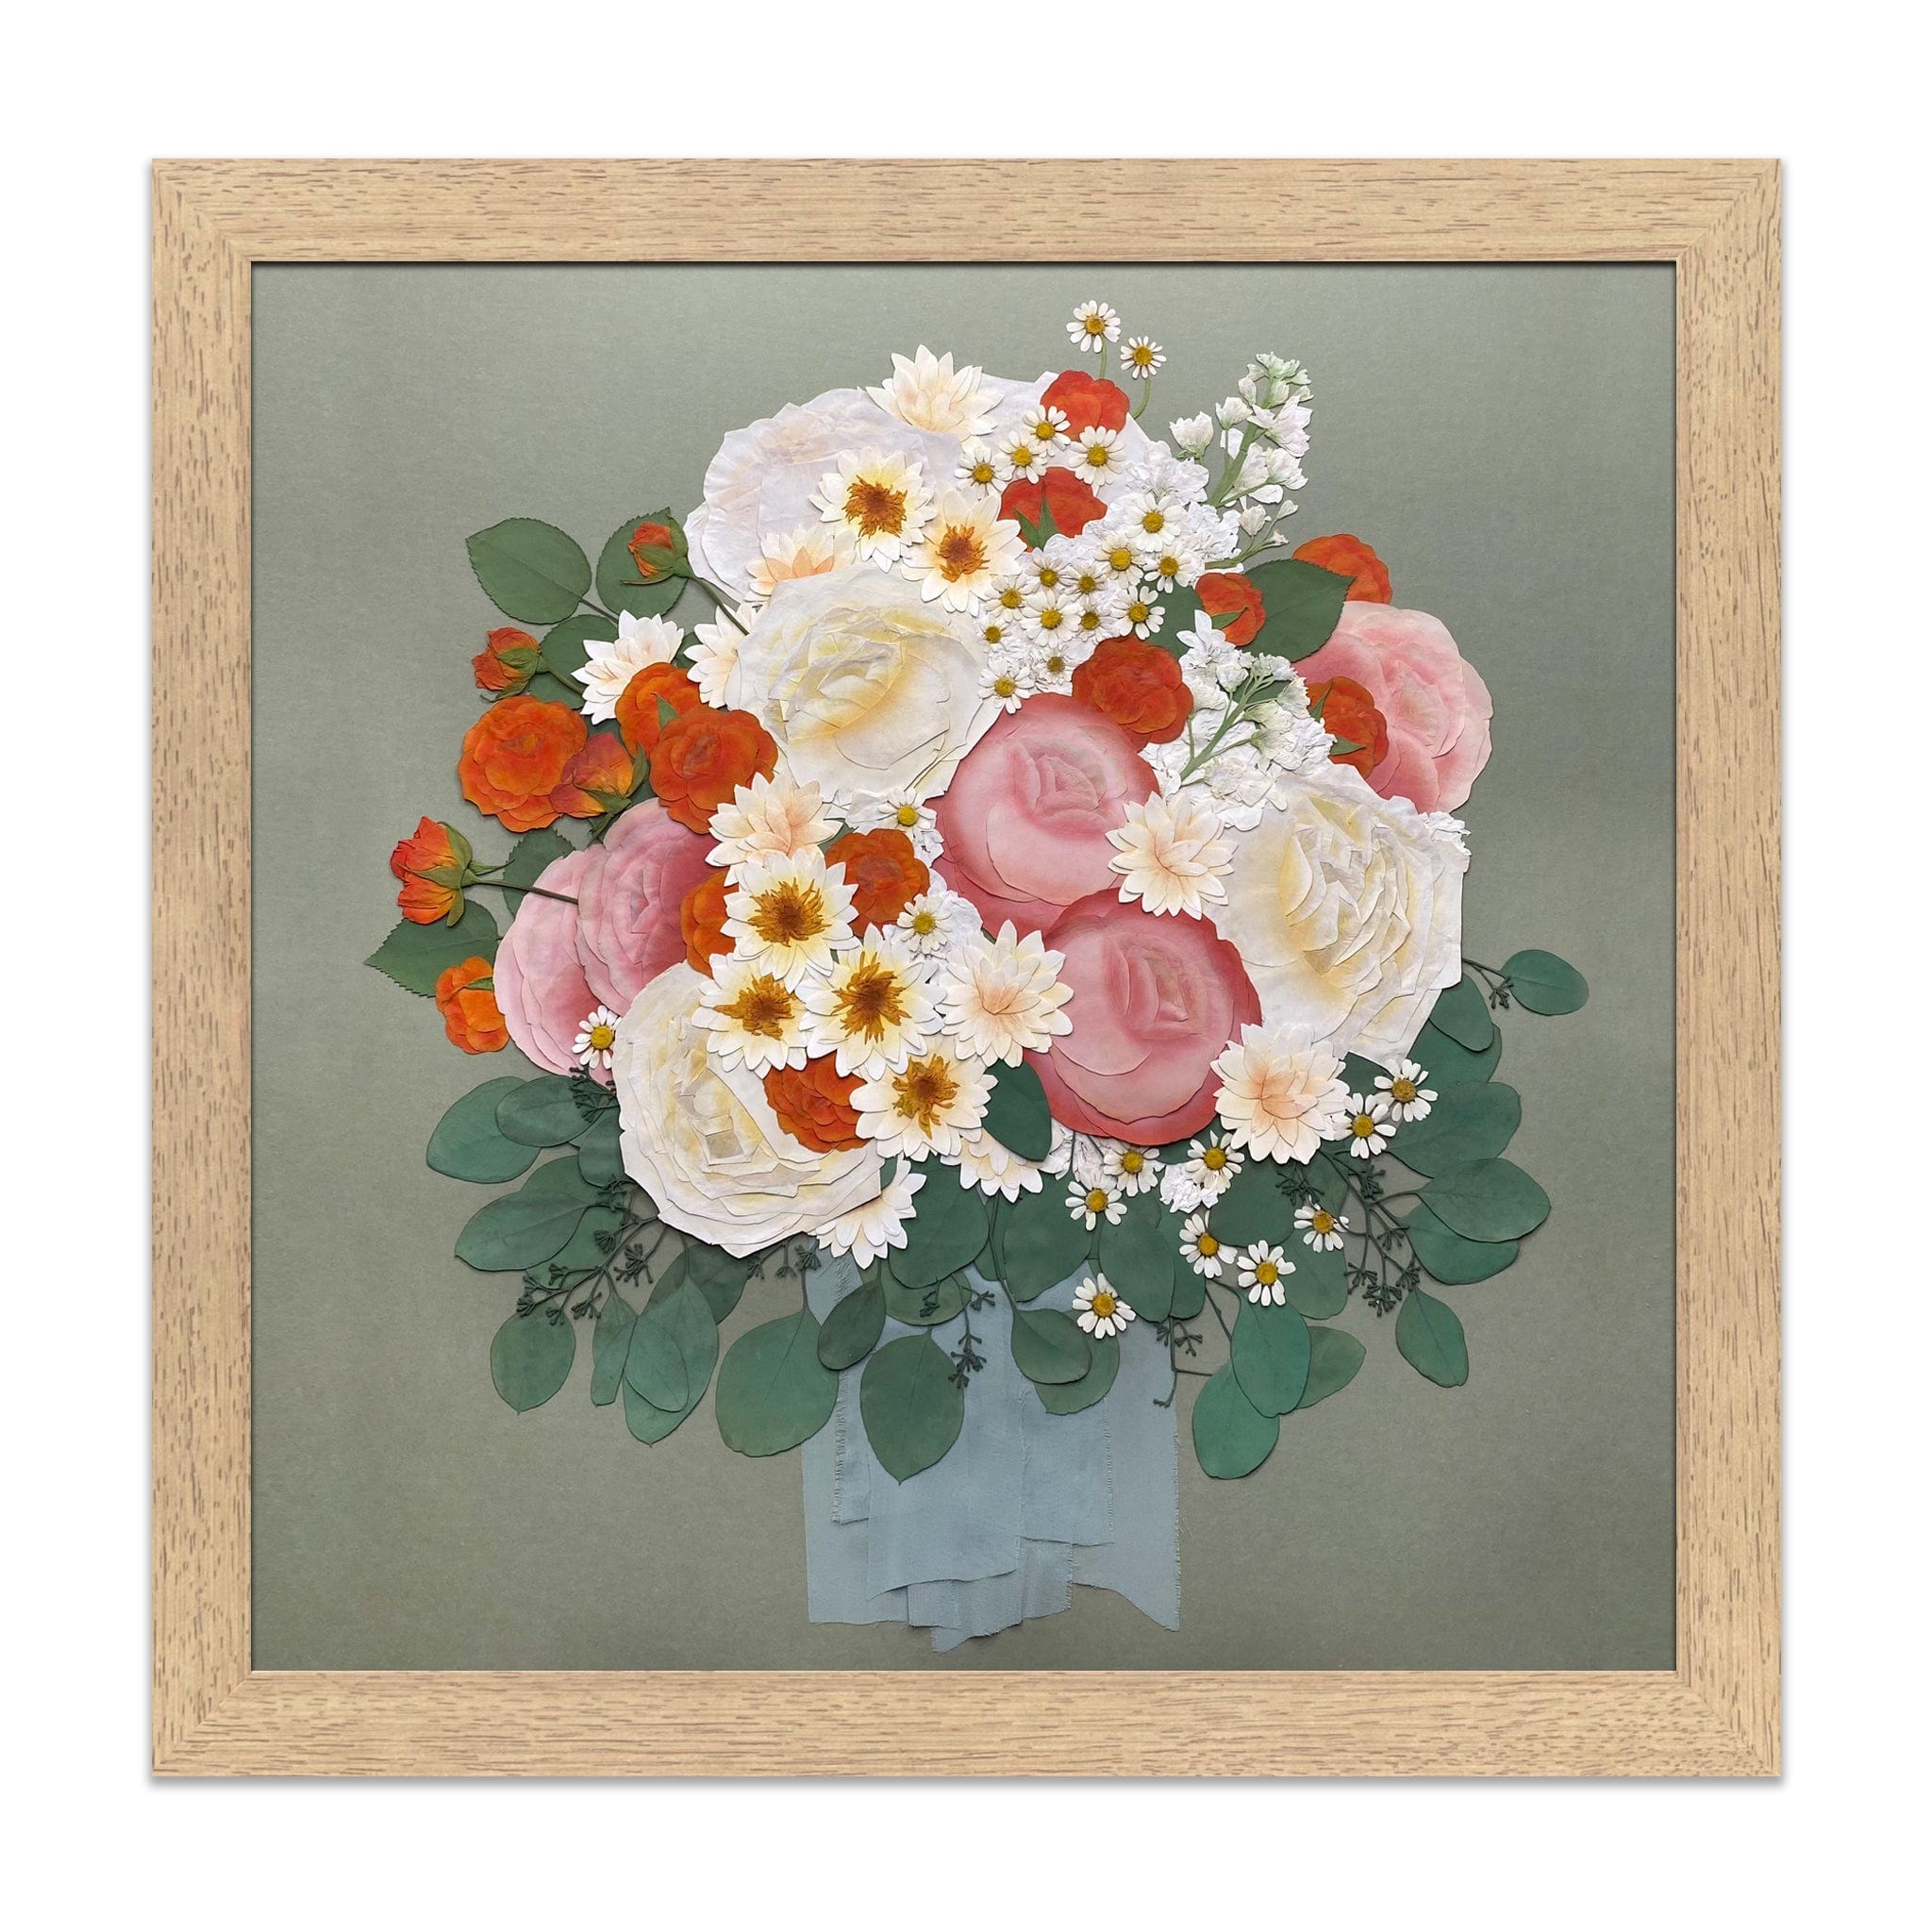 Designs by Andrea Pressed (Framed) 20" x 20" / Square / Extra Large 20" x 20" Classic Frame